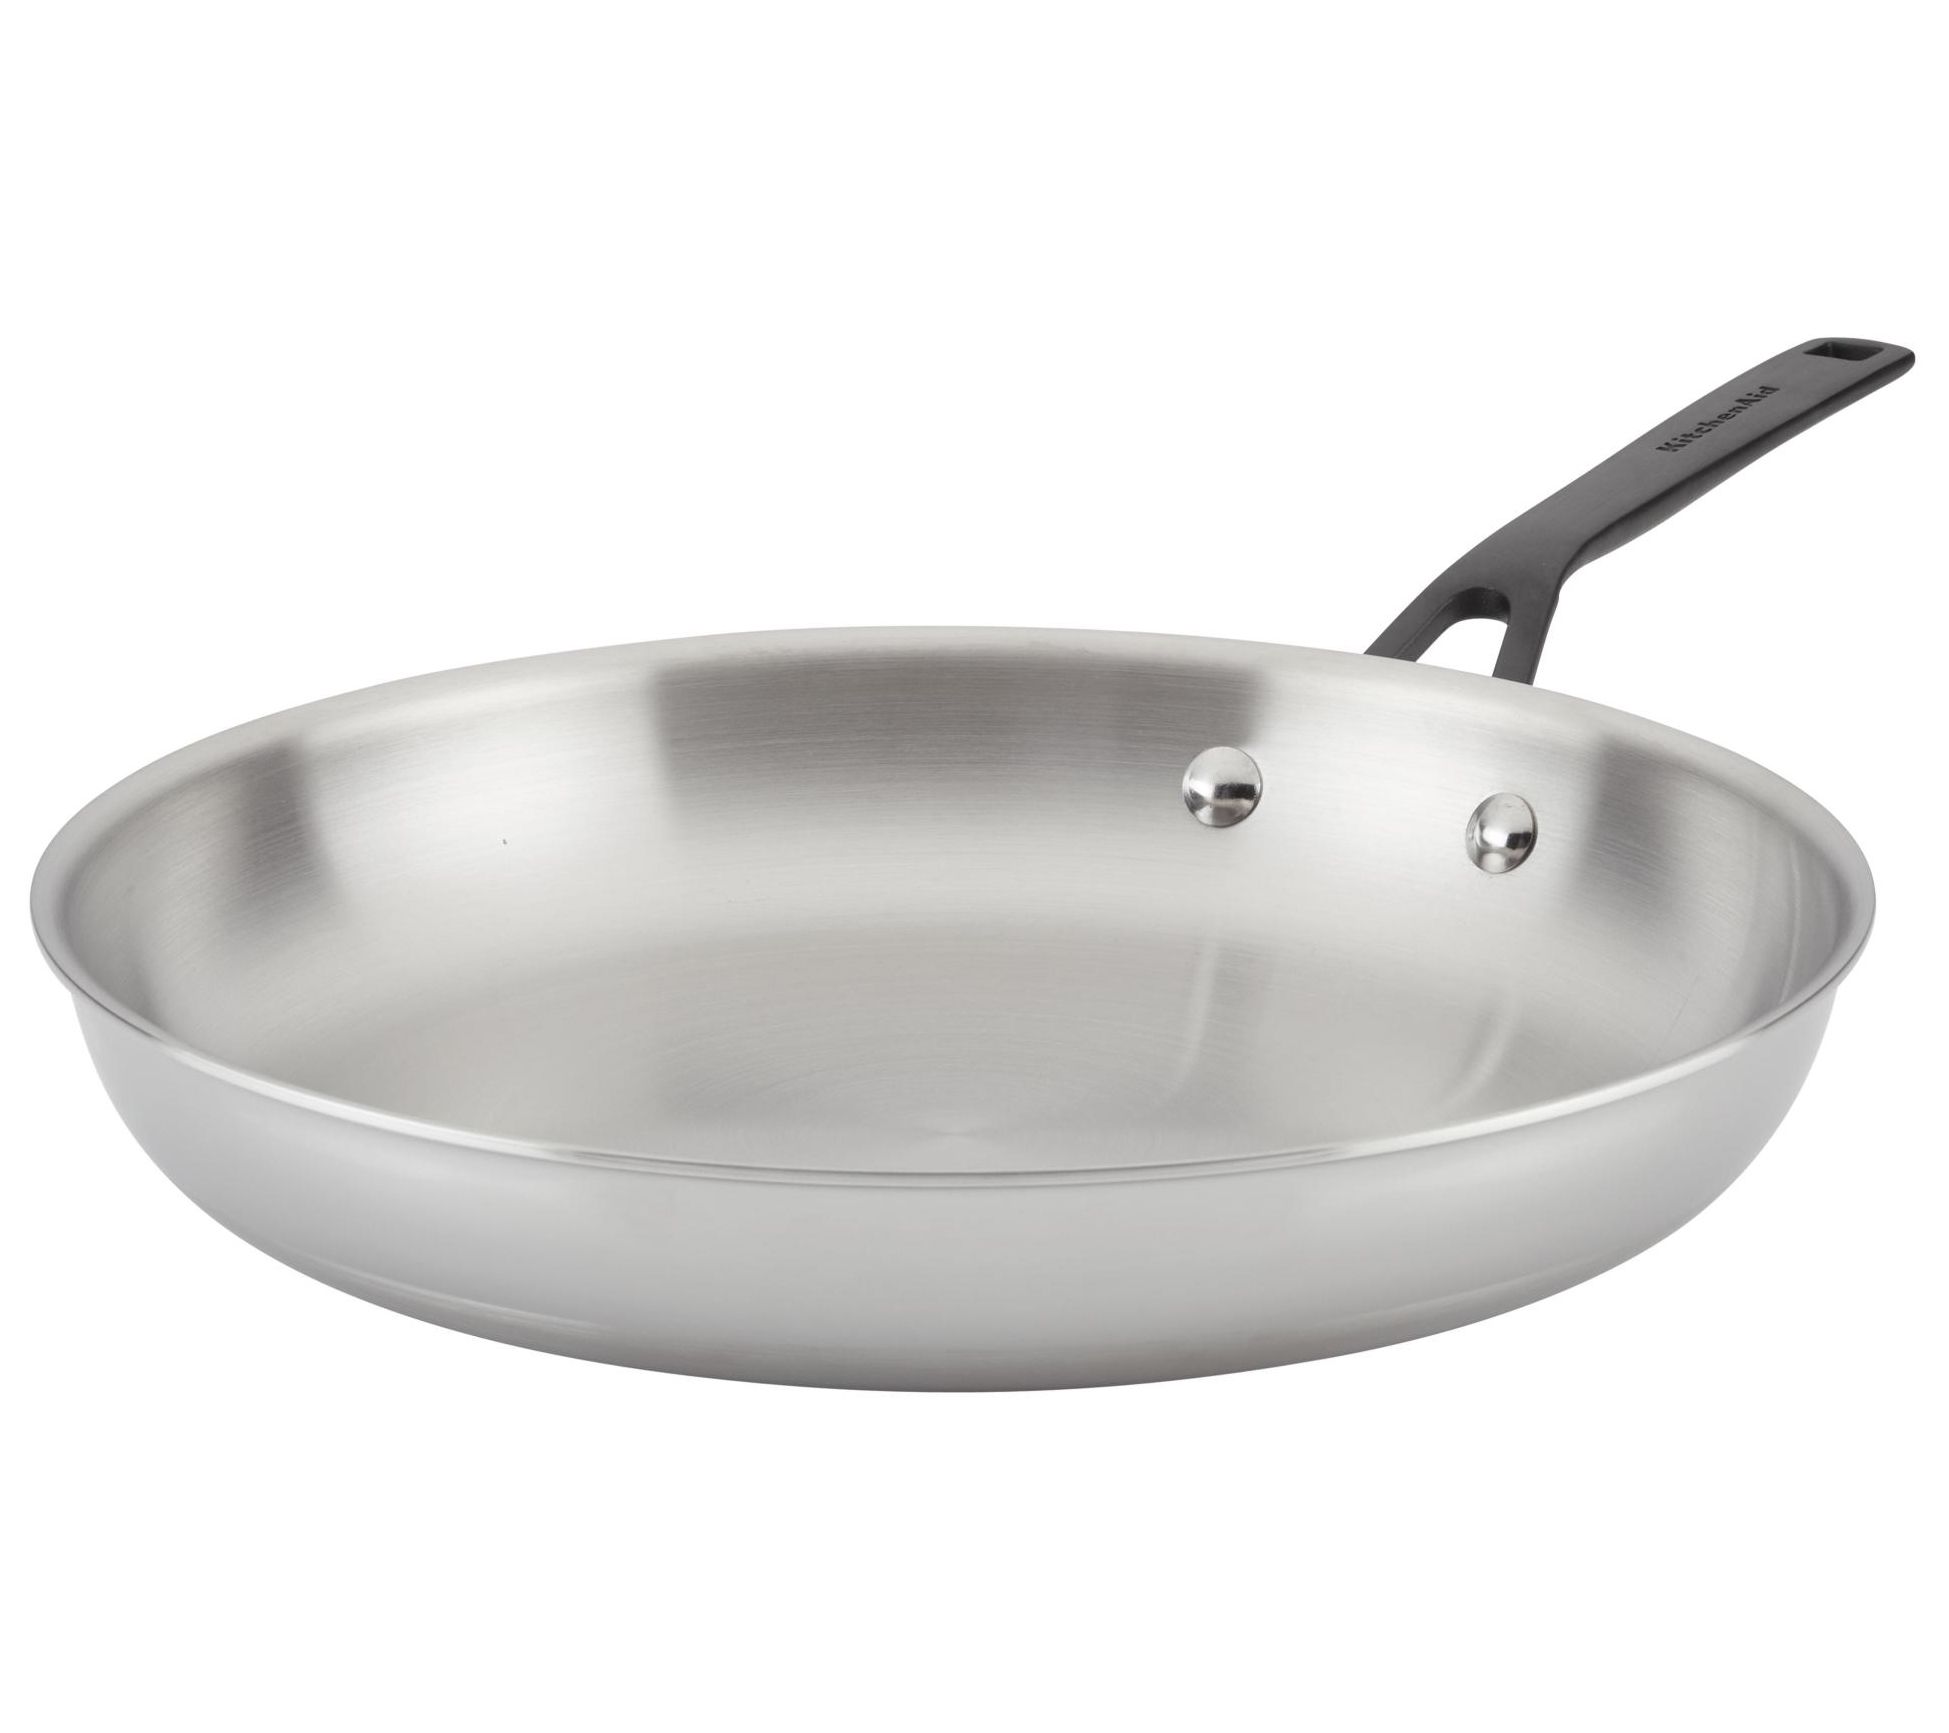 Viking Contemporary 3-Ply Stainless Steel 12-Inch Nonstick Fry Pan